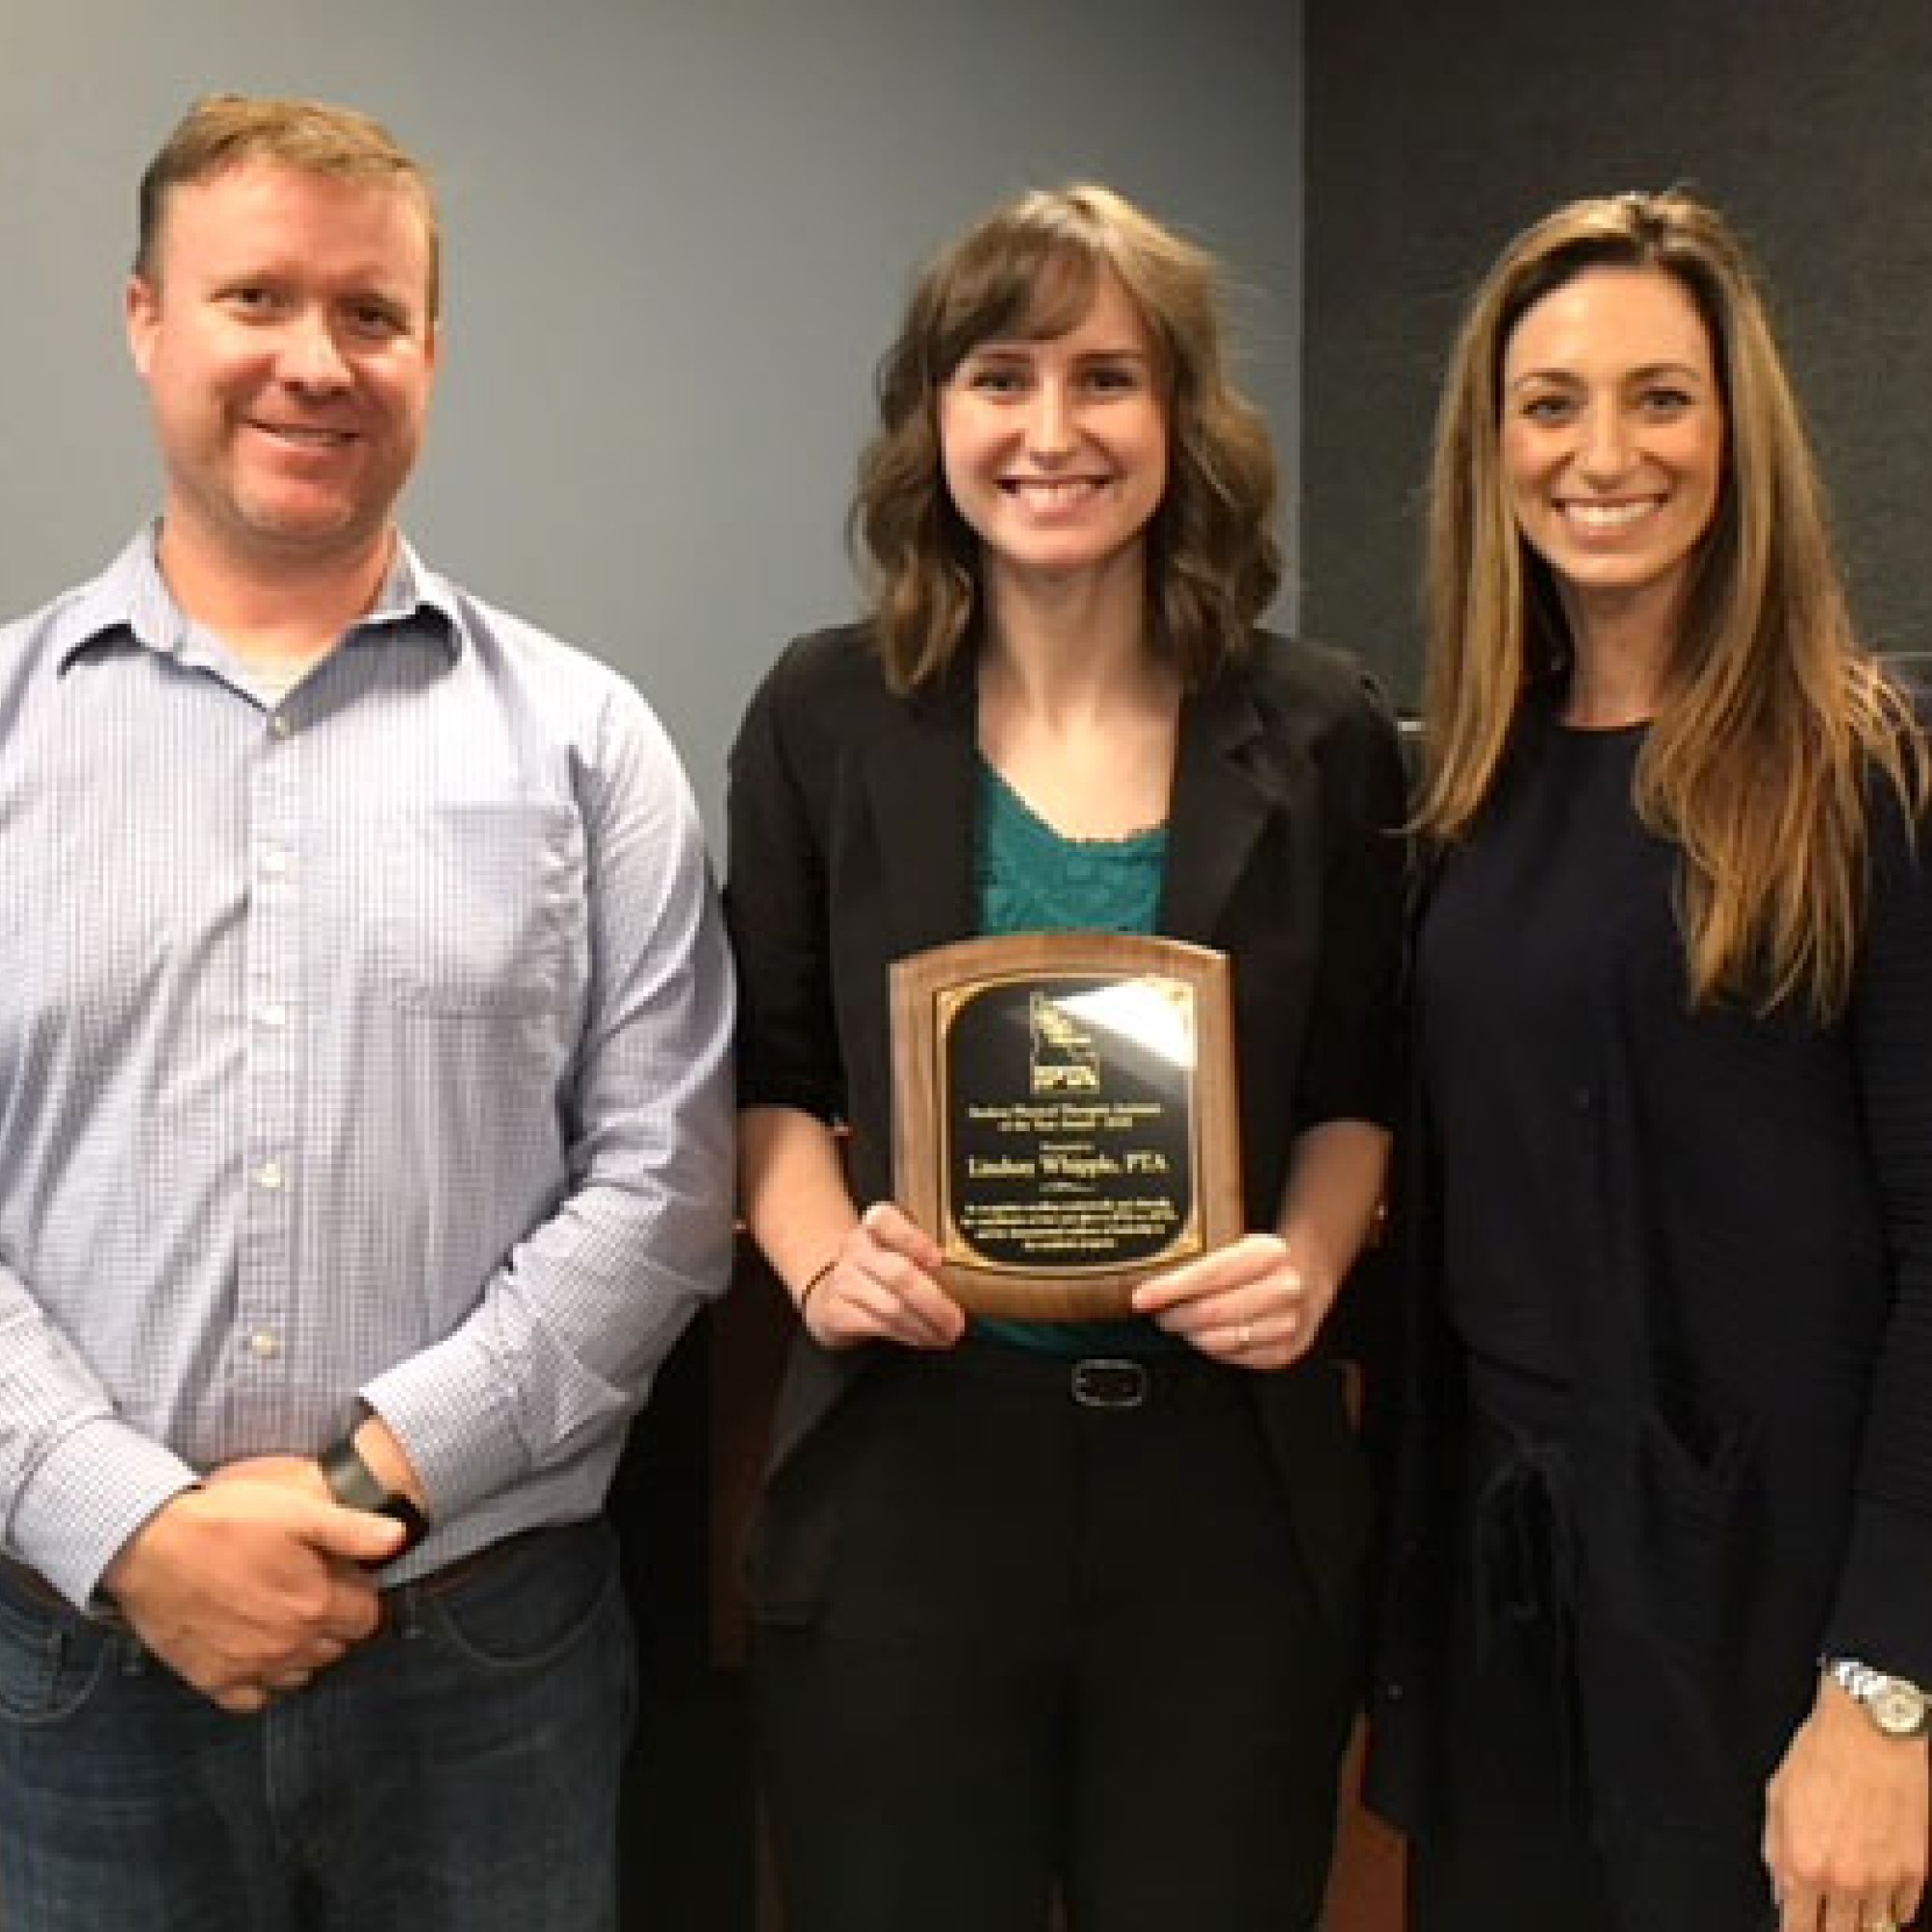 Lindsay Whipple received a PTA Student of the Year award from The Idaho Chapter of the American Physical Therapy Association.